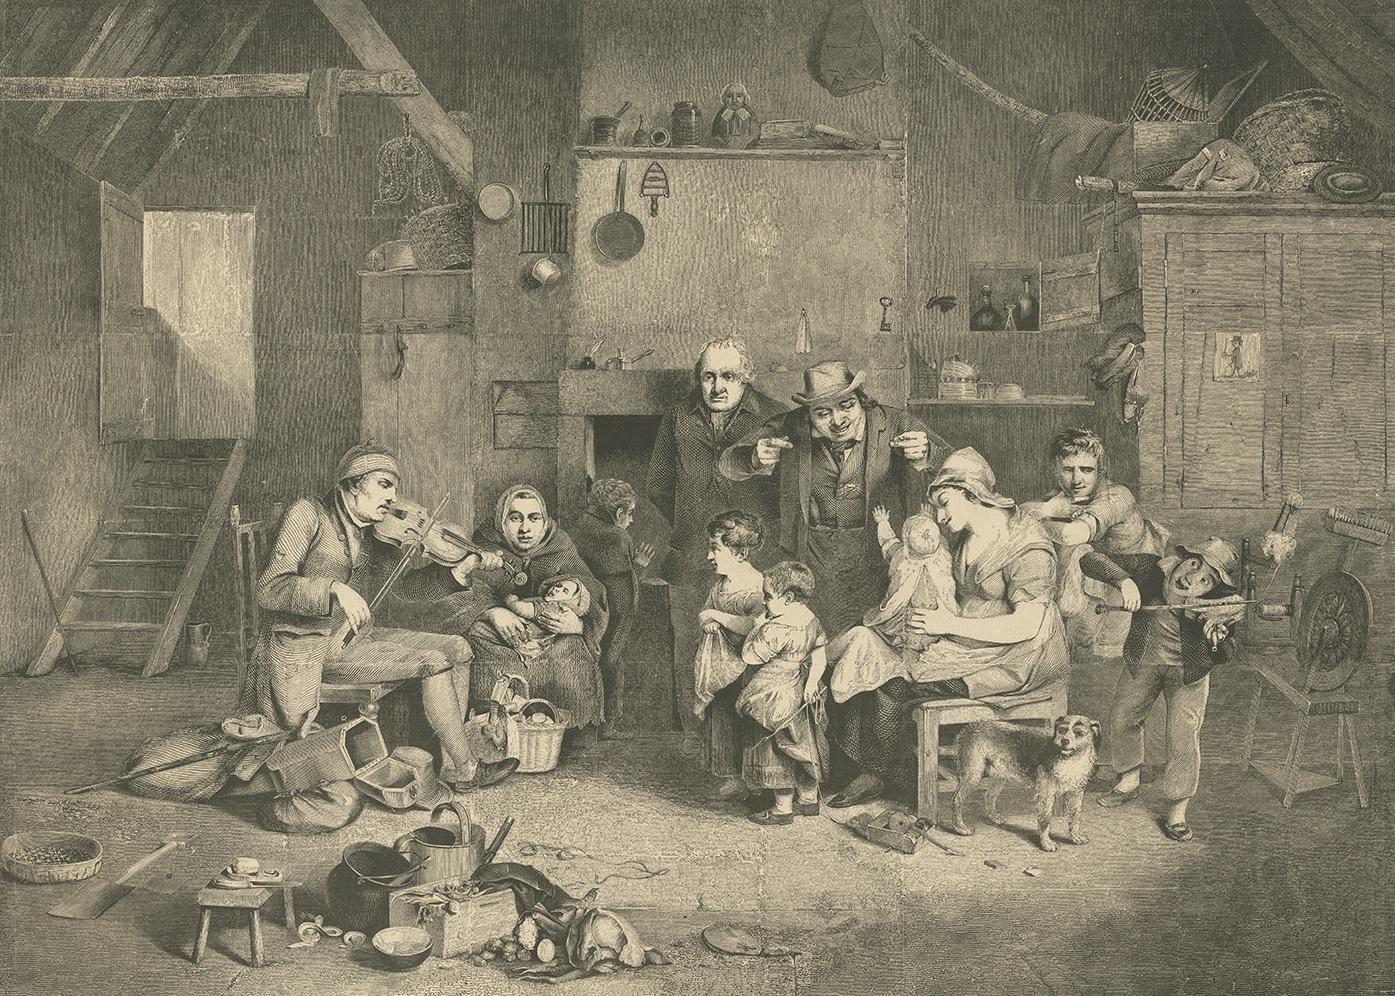 Antique print titled 'The Blind Fiddler'. Beautiful scene with a blind, old fiddler on the left. Moved by the music a gentleman 'snaps' his fingers & a young boy, holding a bellows & fire poker, plays along with the 'fiddler'. Engraved by H.